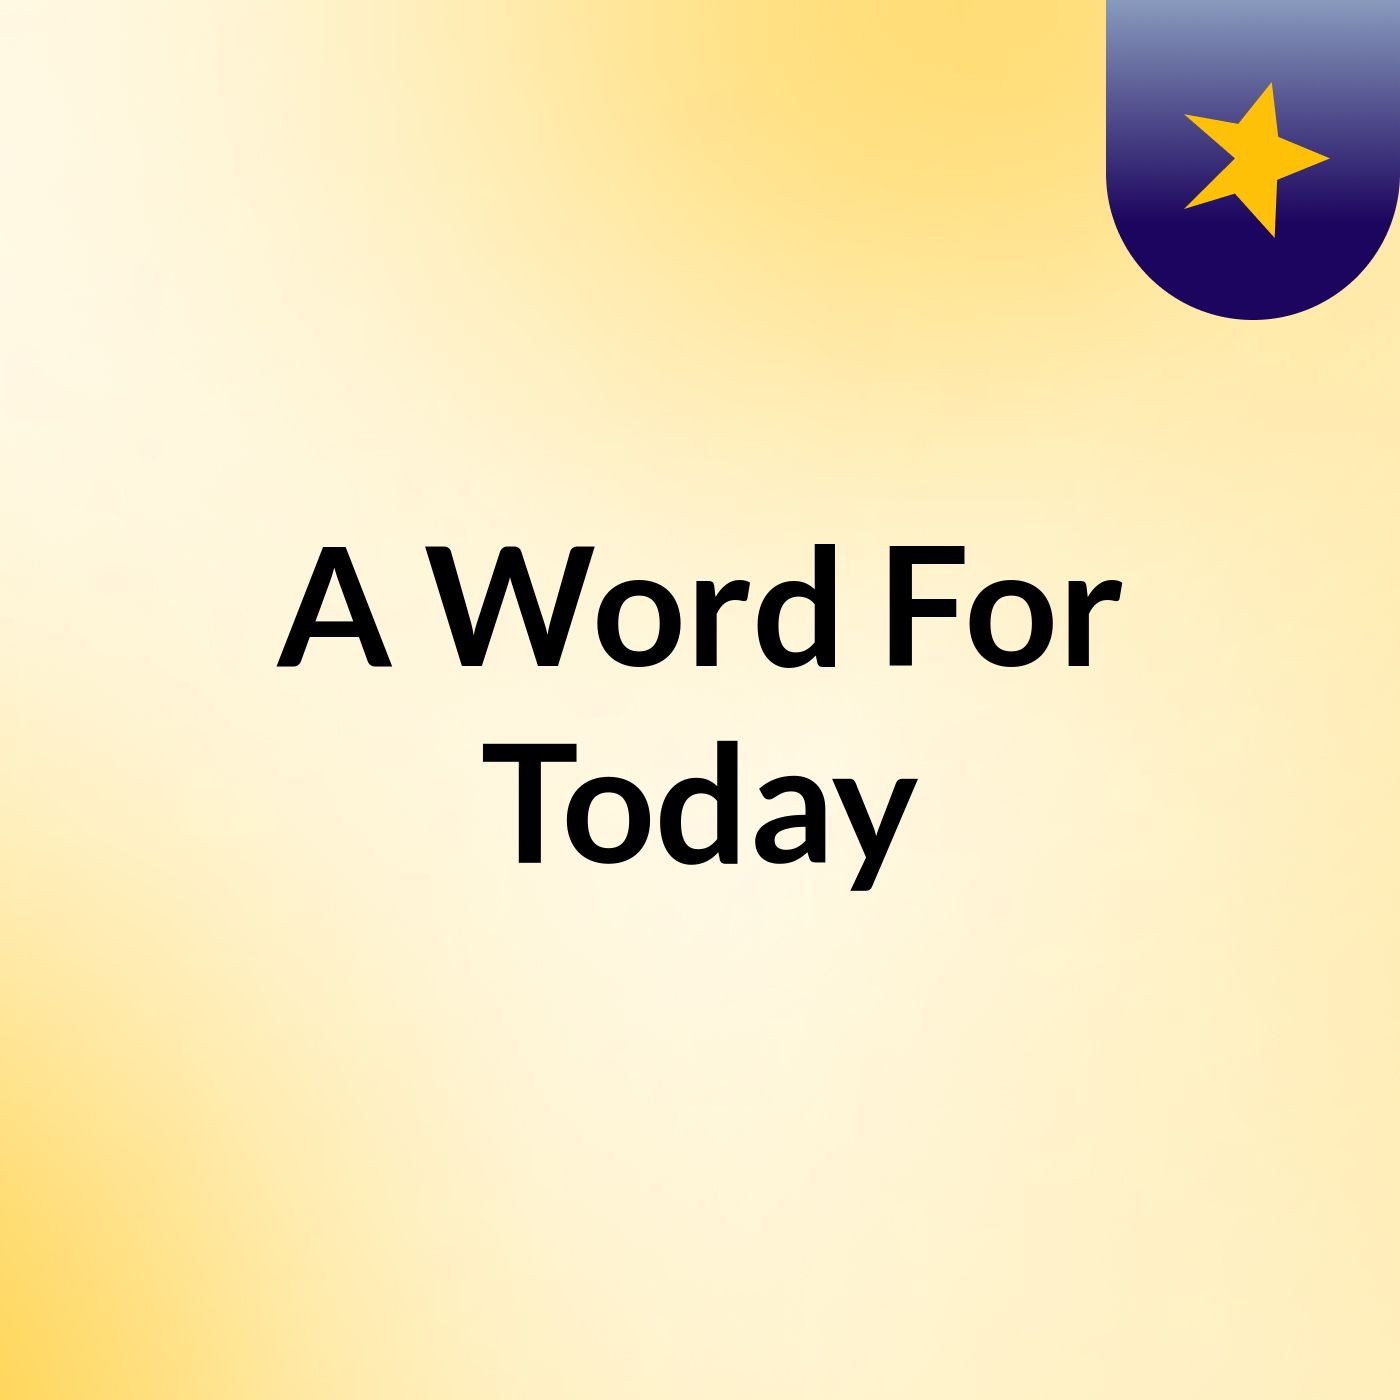 A Word For Today